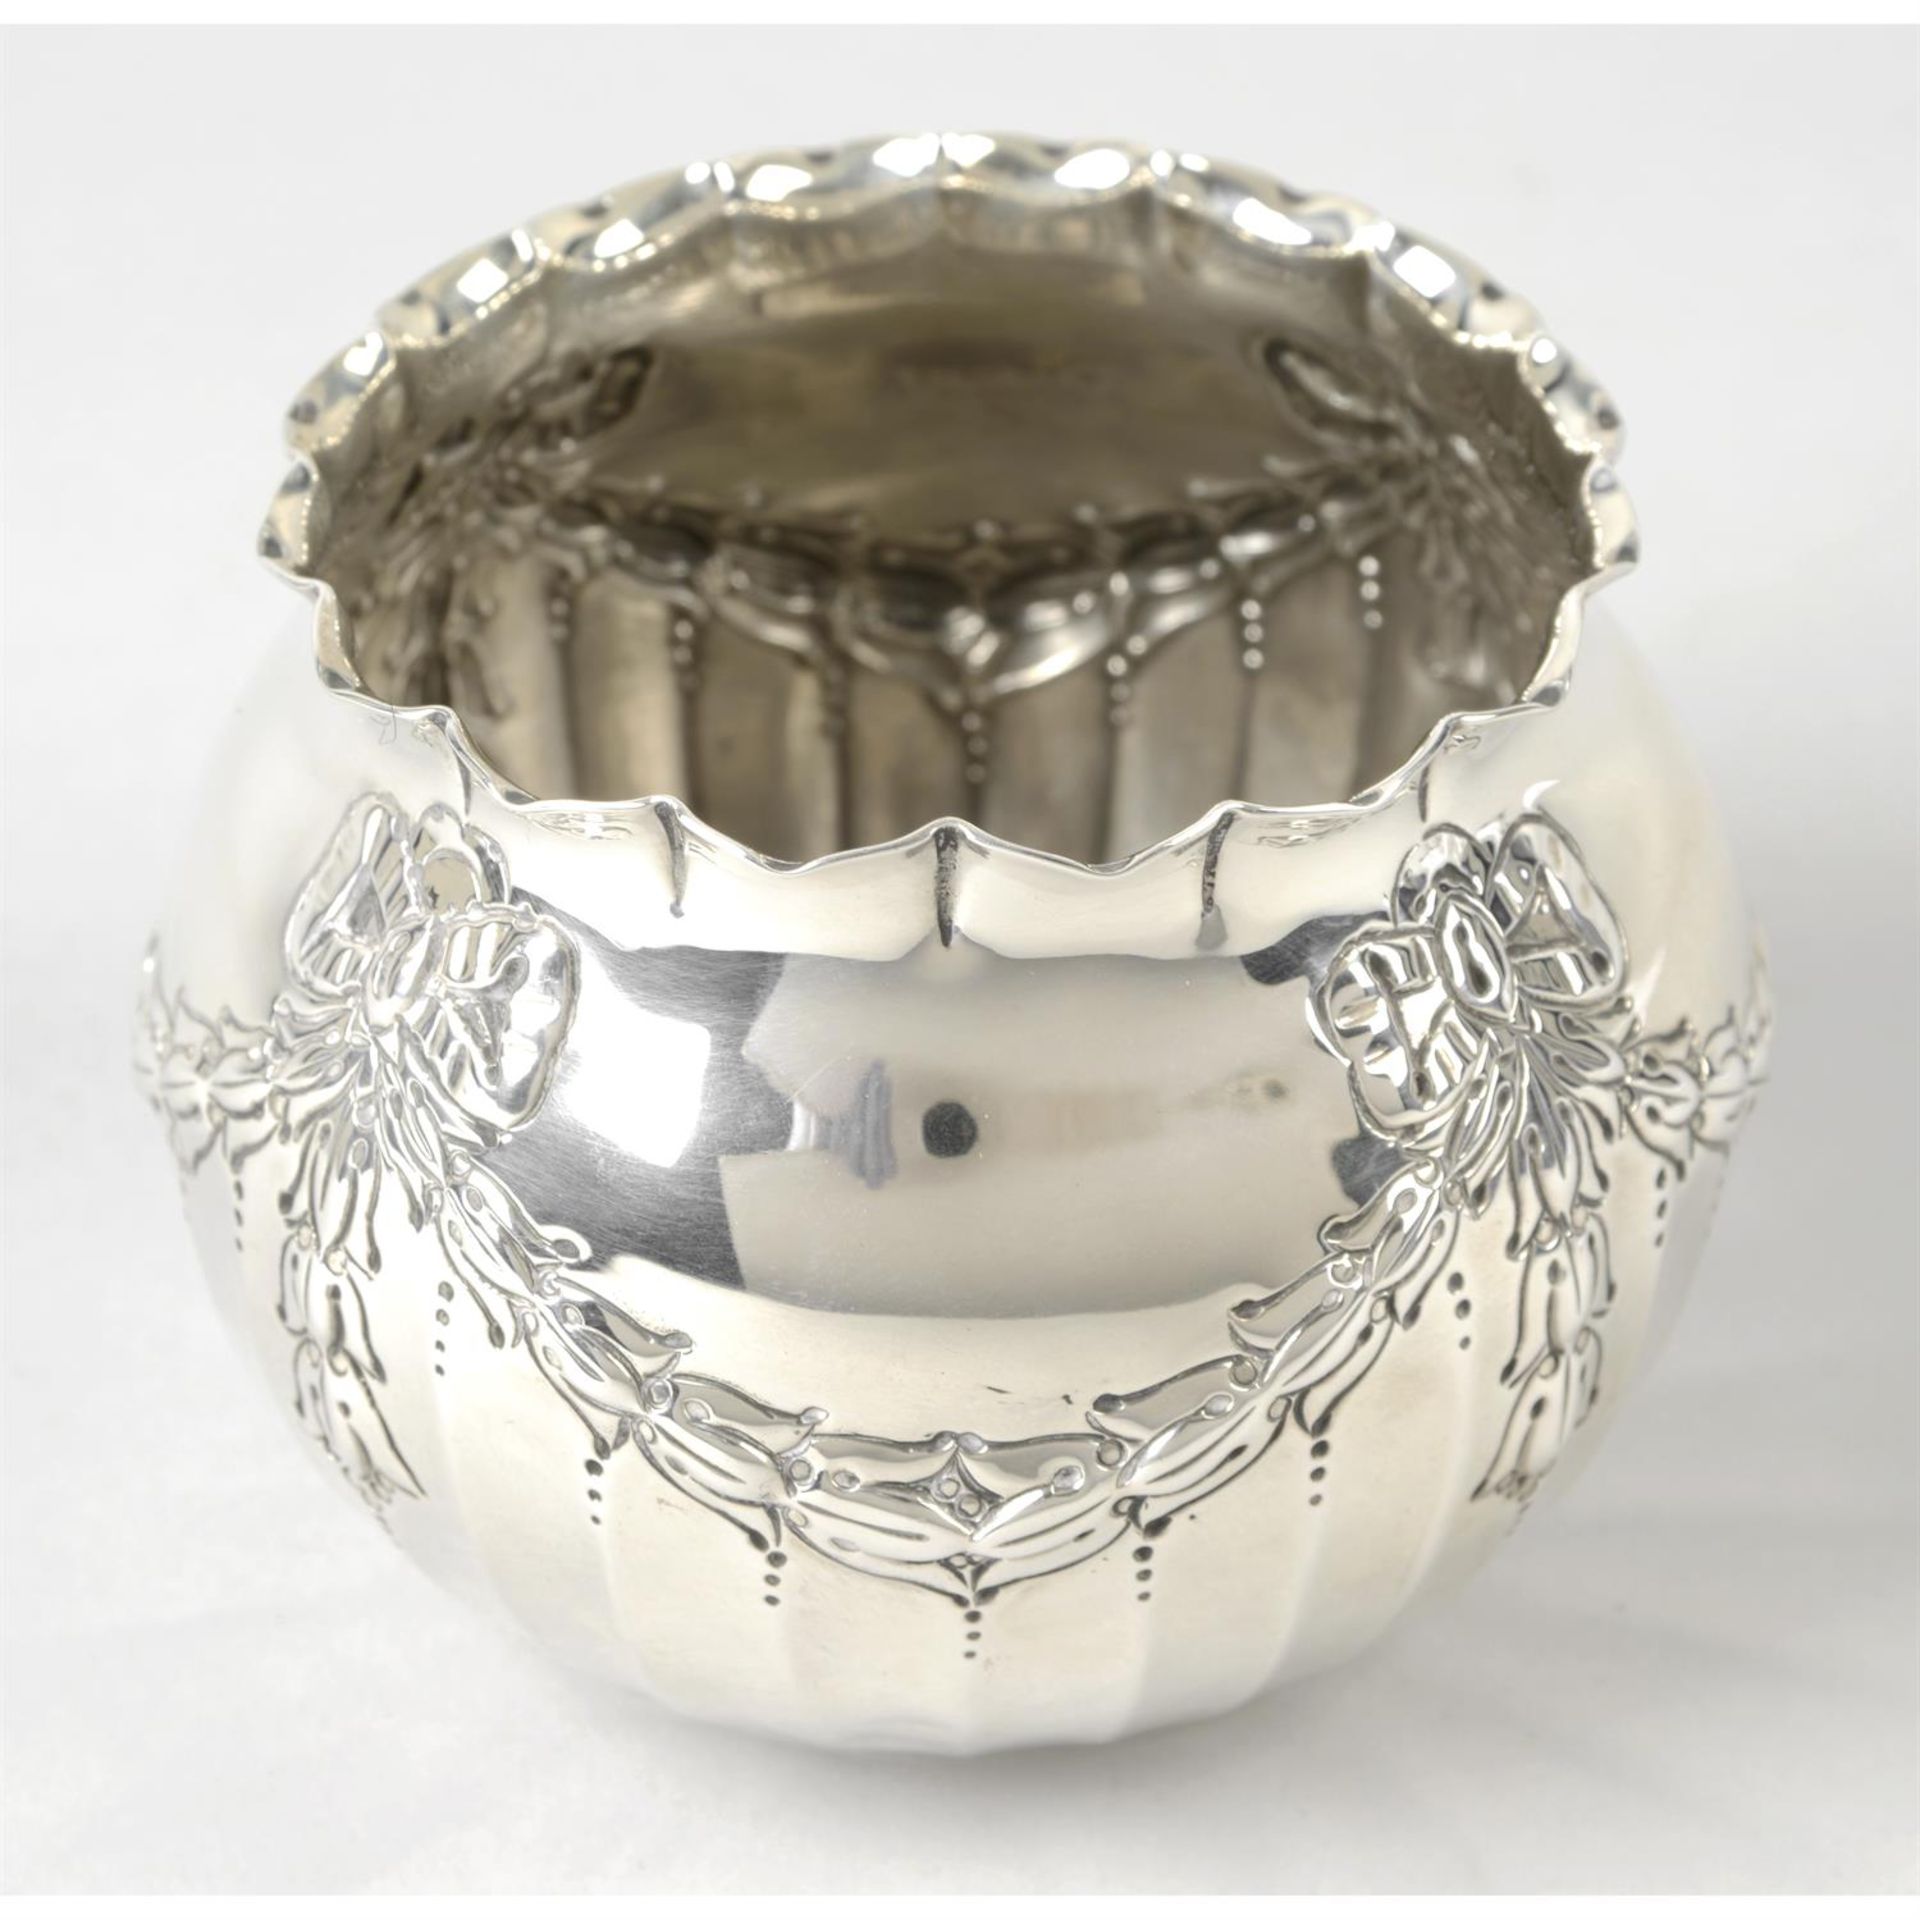 A turn of the century silver bowl with swag decoration.